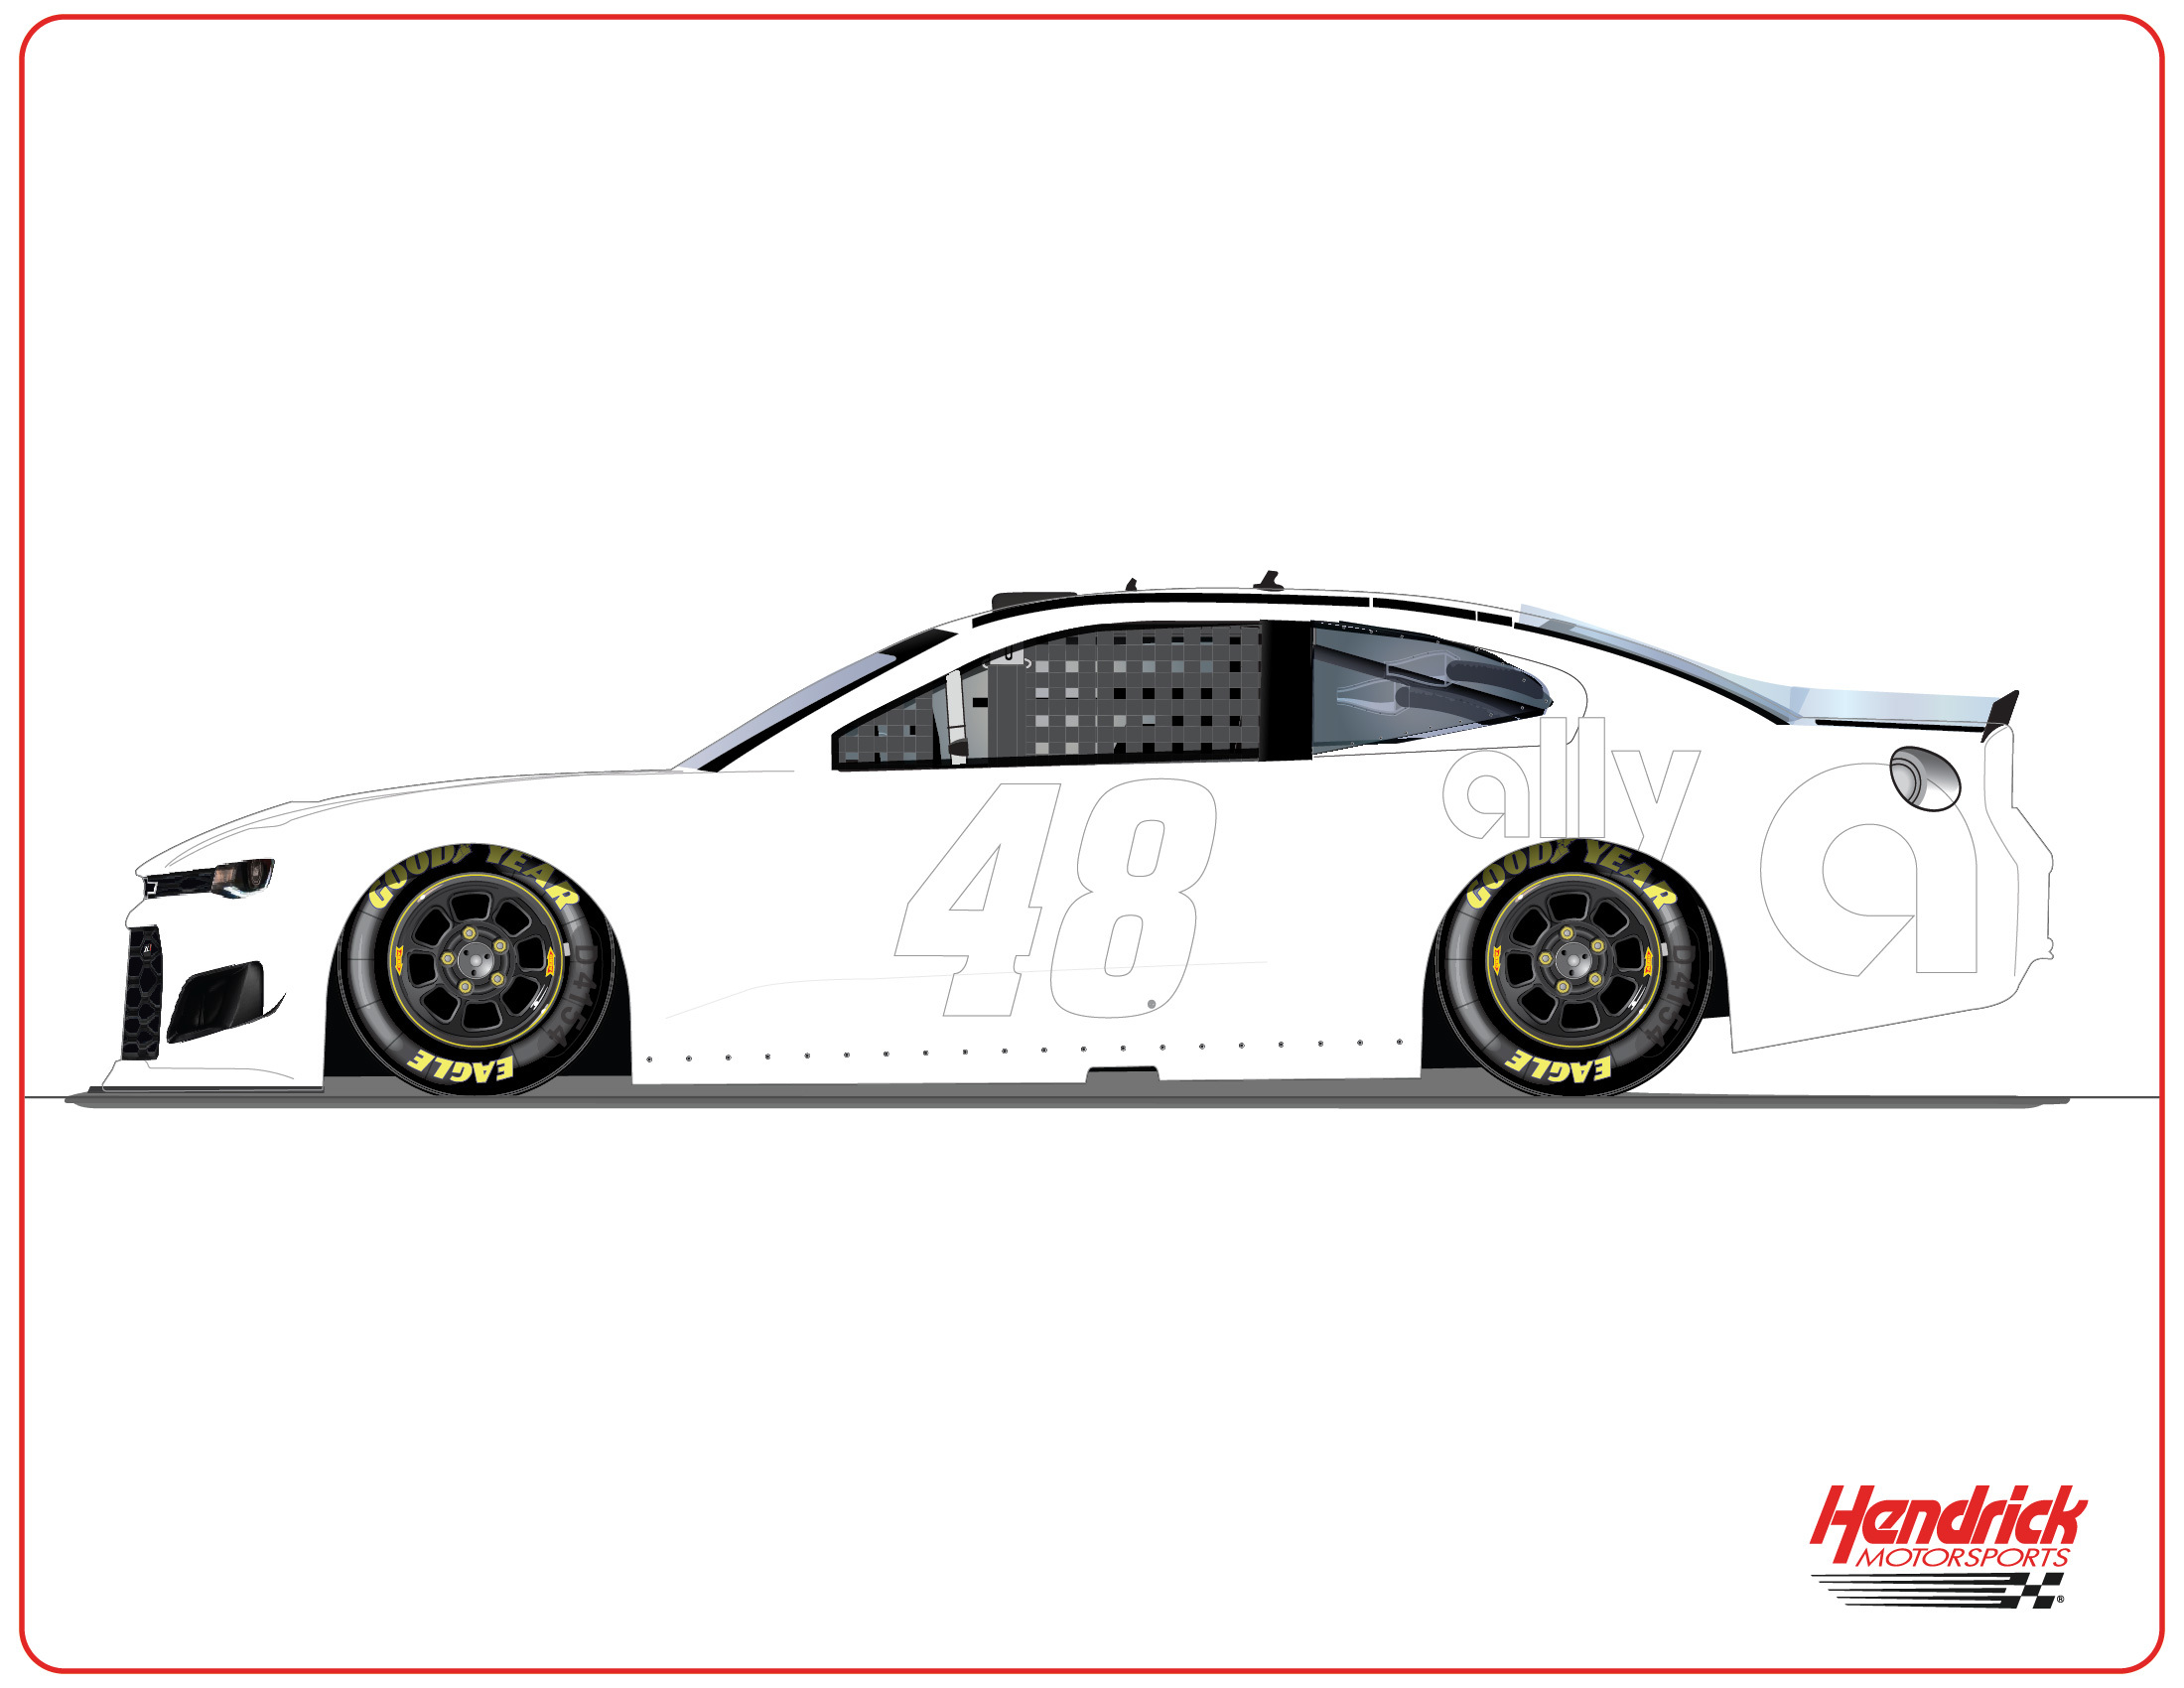 Coloring word jumbles and more check out our themed hendrick motorsports crafts hendrick motorsports